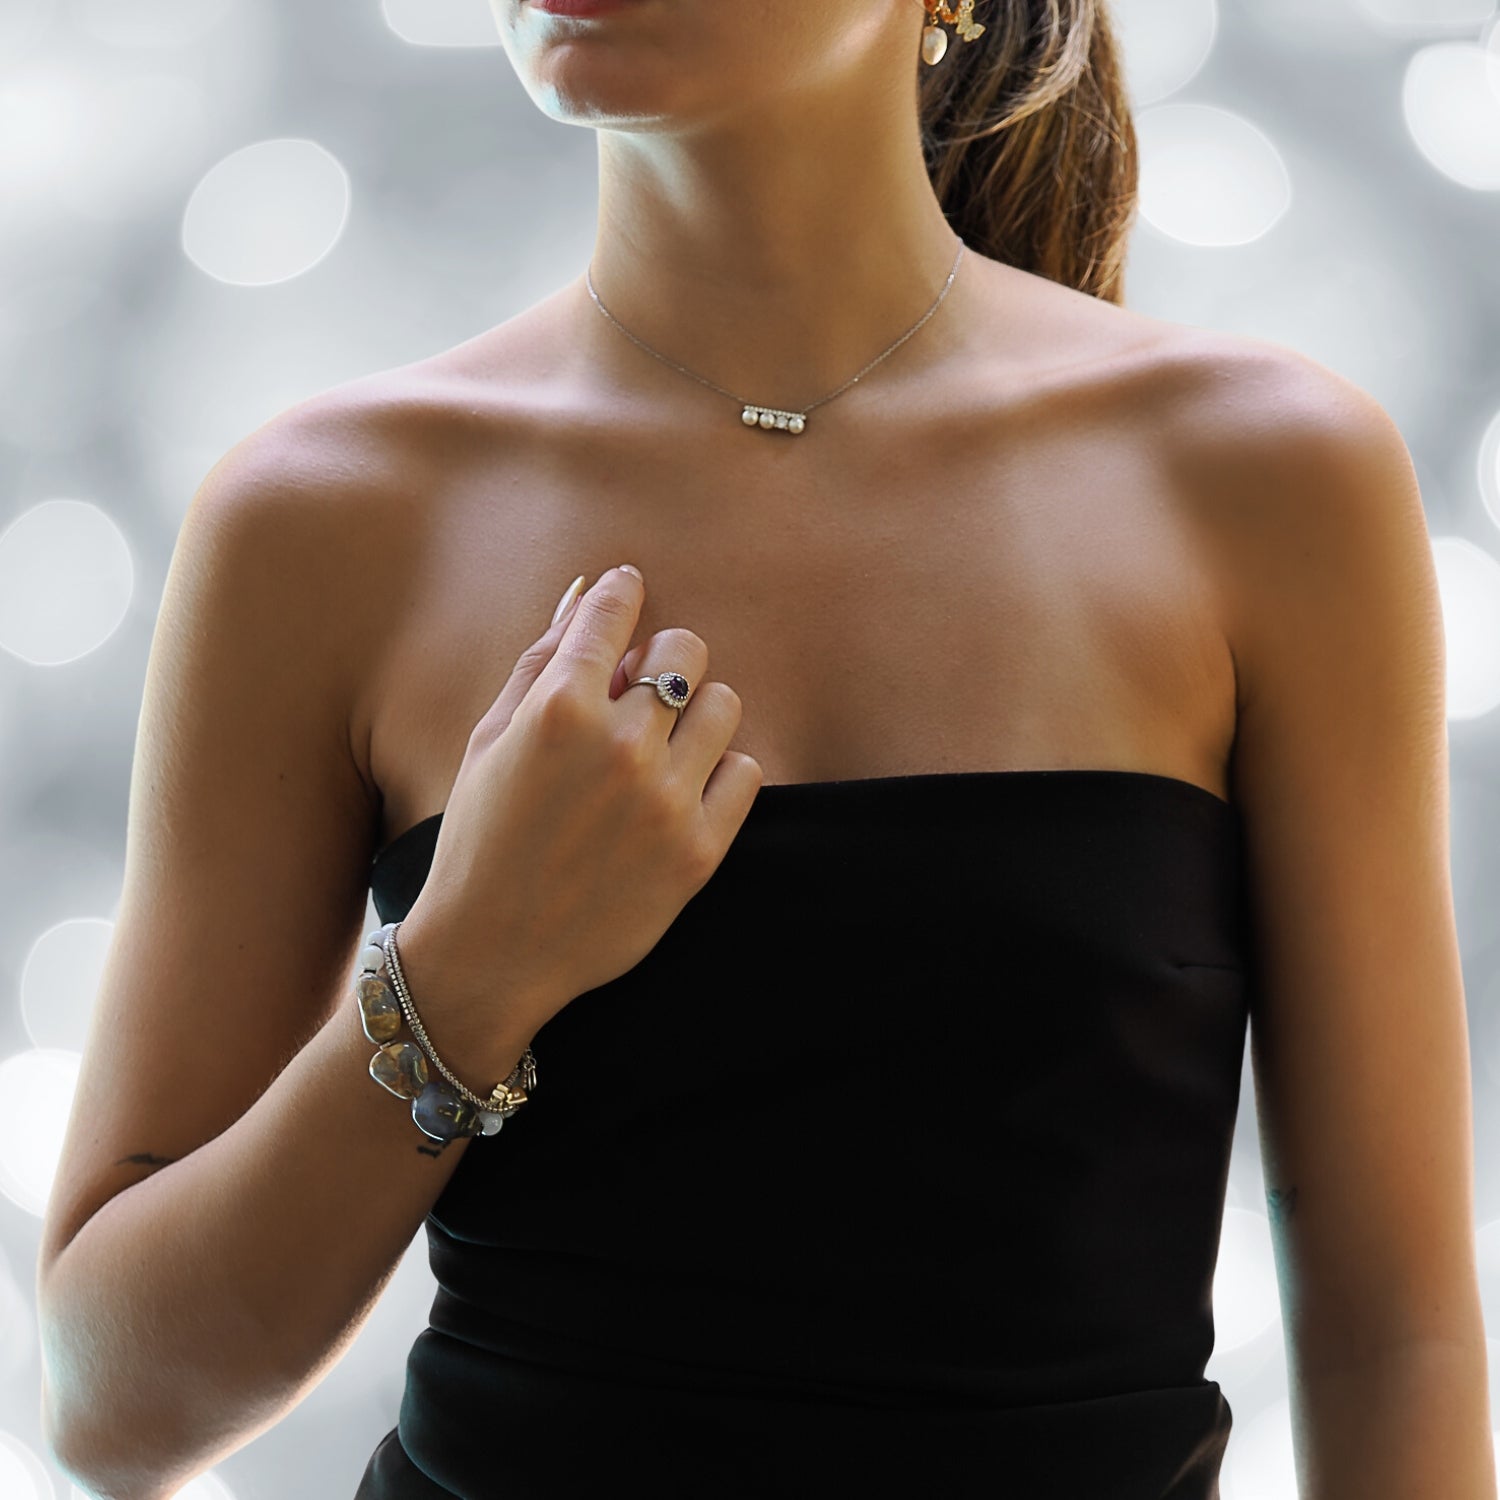 Model Wearing Amethyst &amp; Cz Diamond Ring - Tranquility on Display